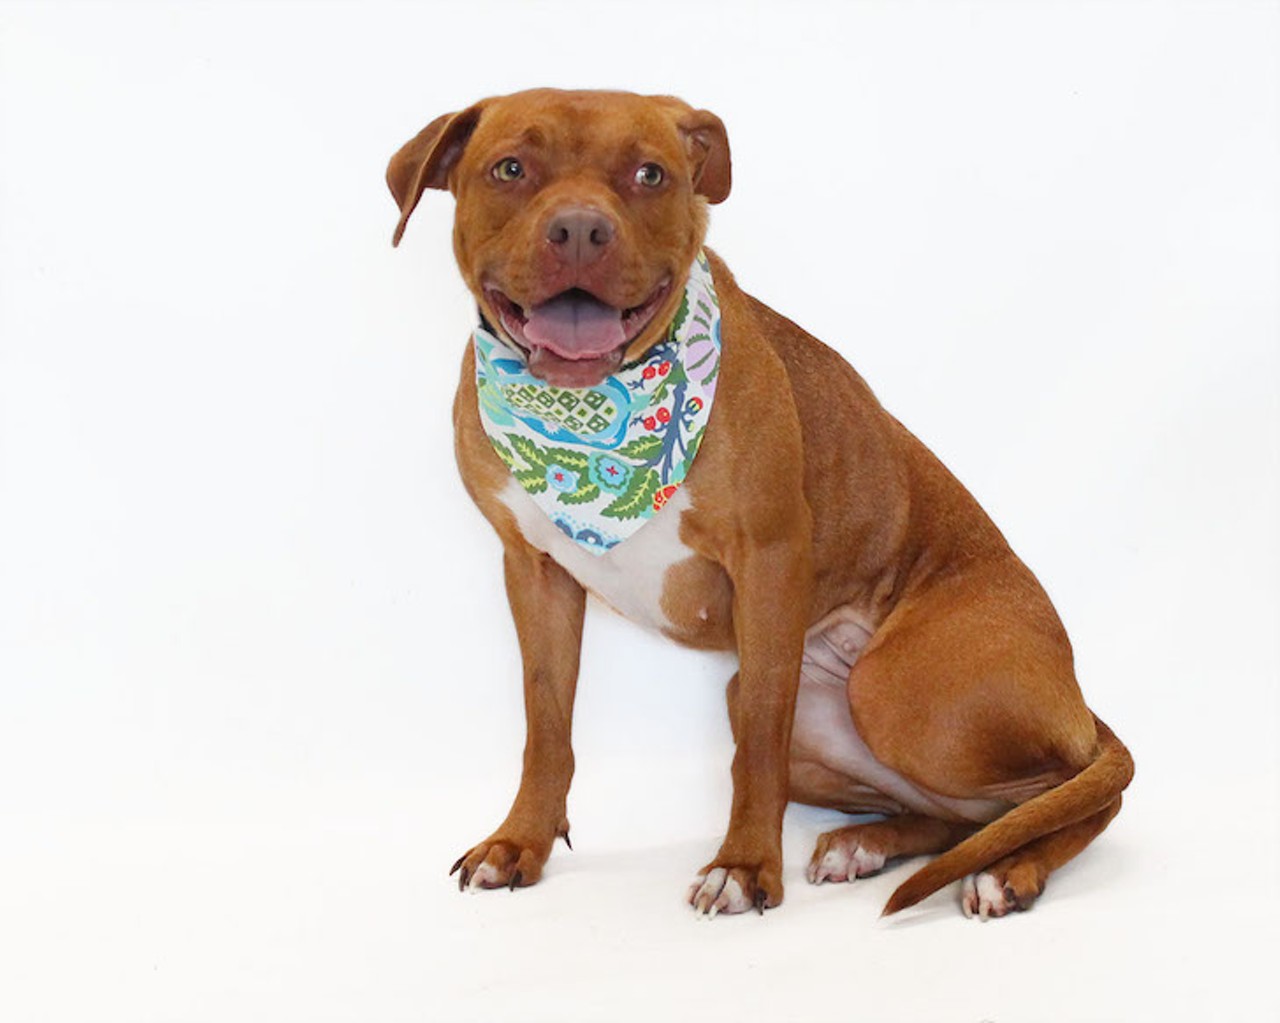 31 adoptable dogs available right now at OCAS